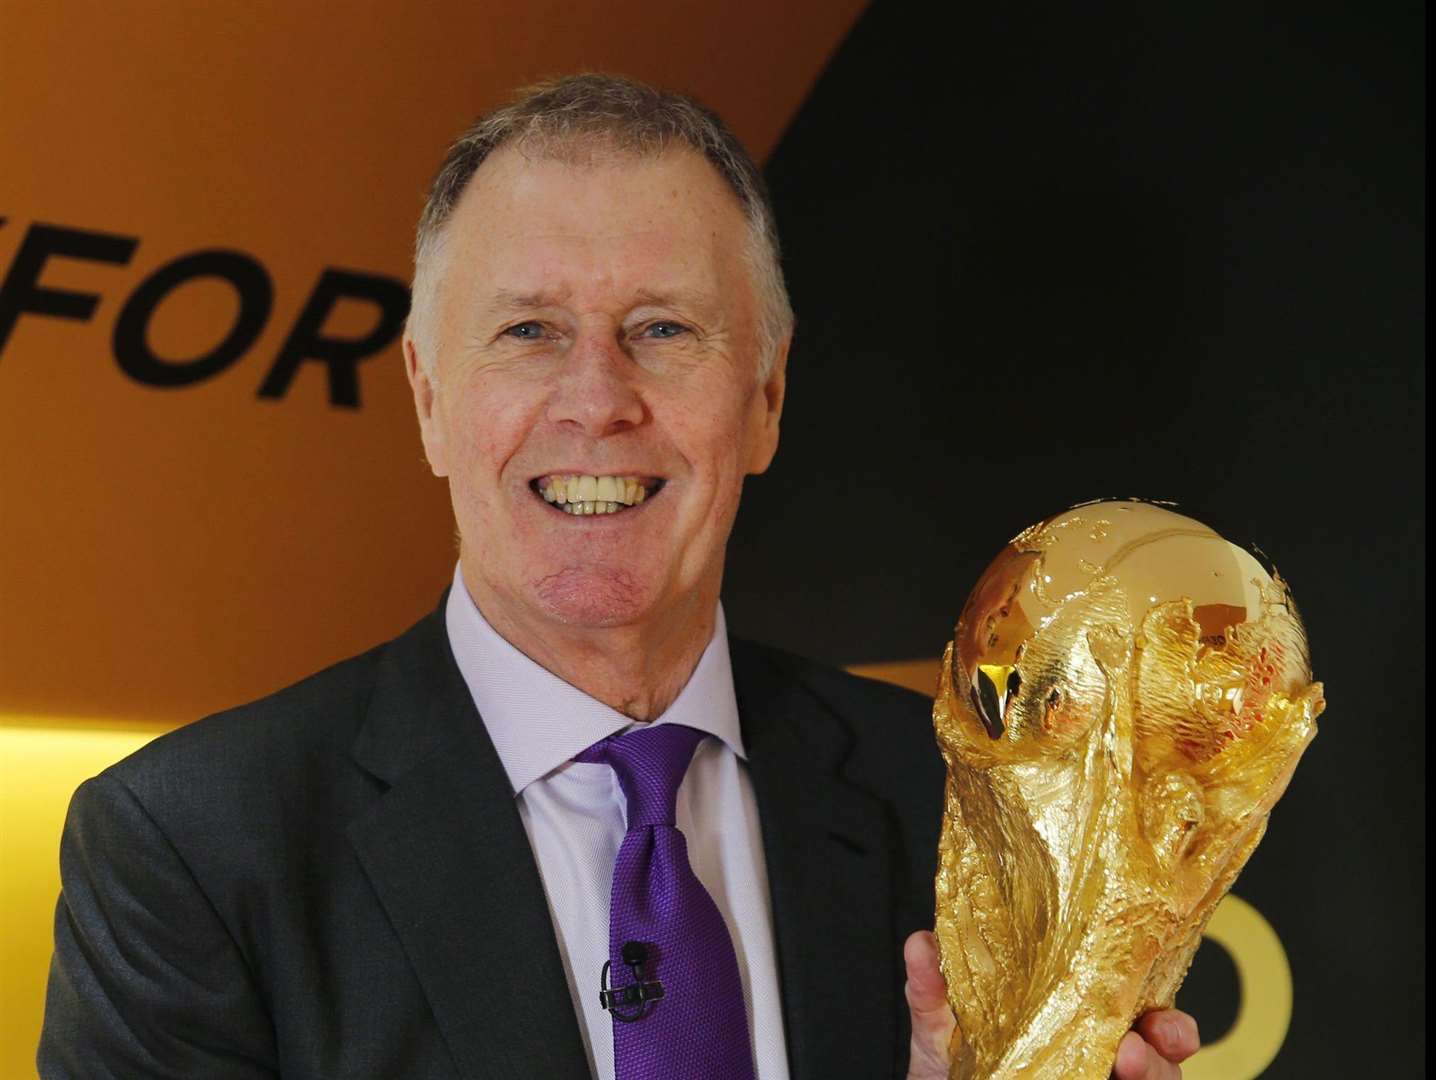 England's 1966 World Cup winner Geoff Hurst holds the FIFA World Cup trophy Photo: AP Photo/Alastair Grant